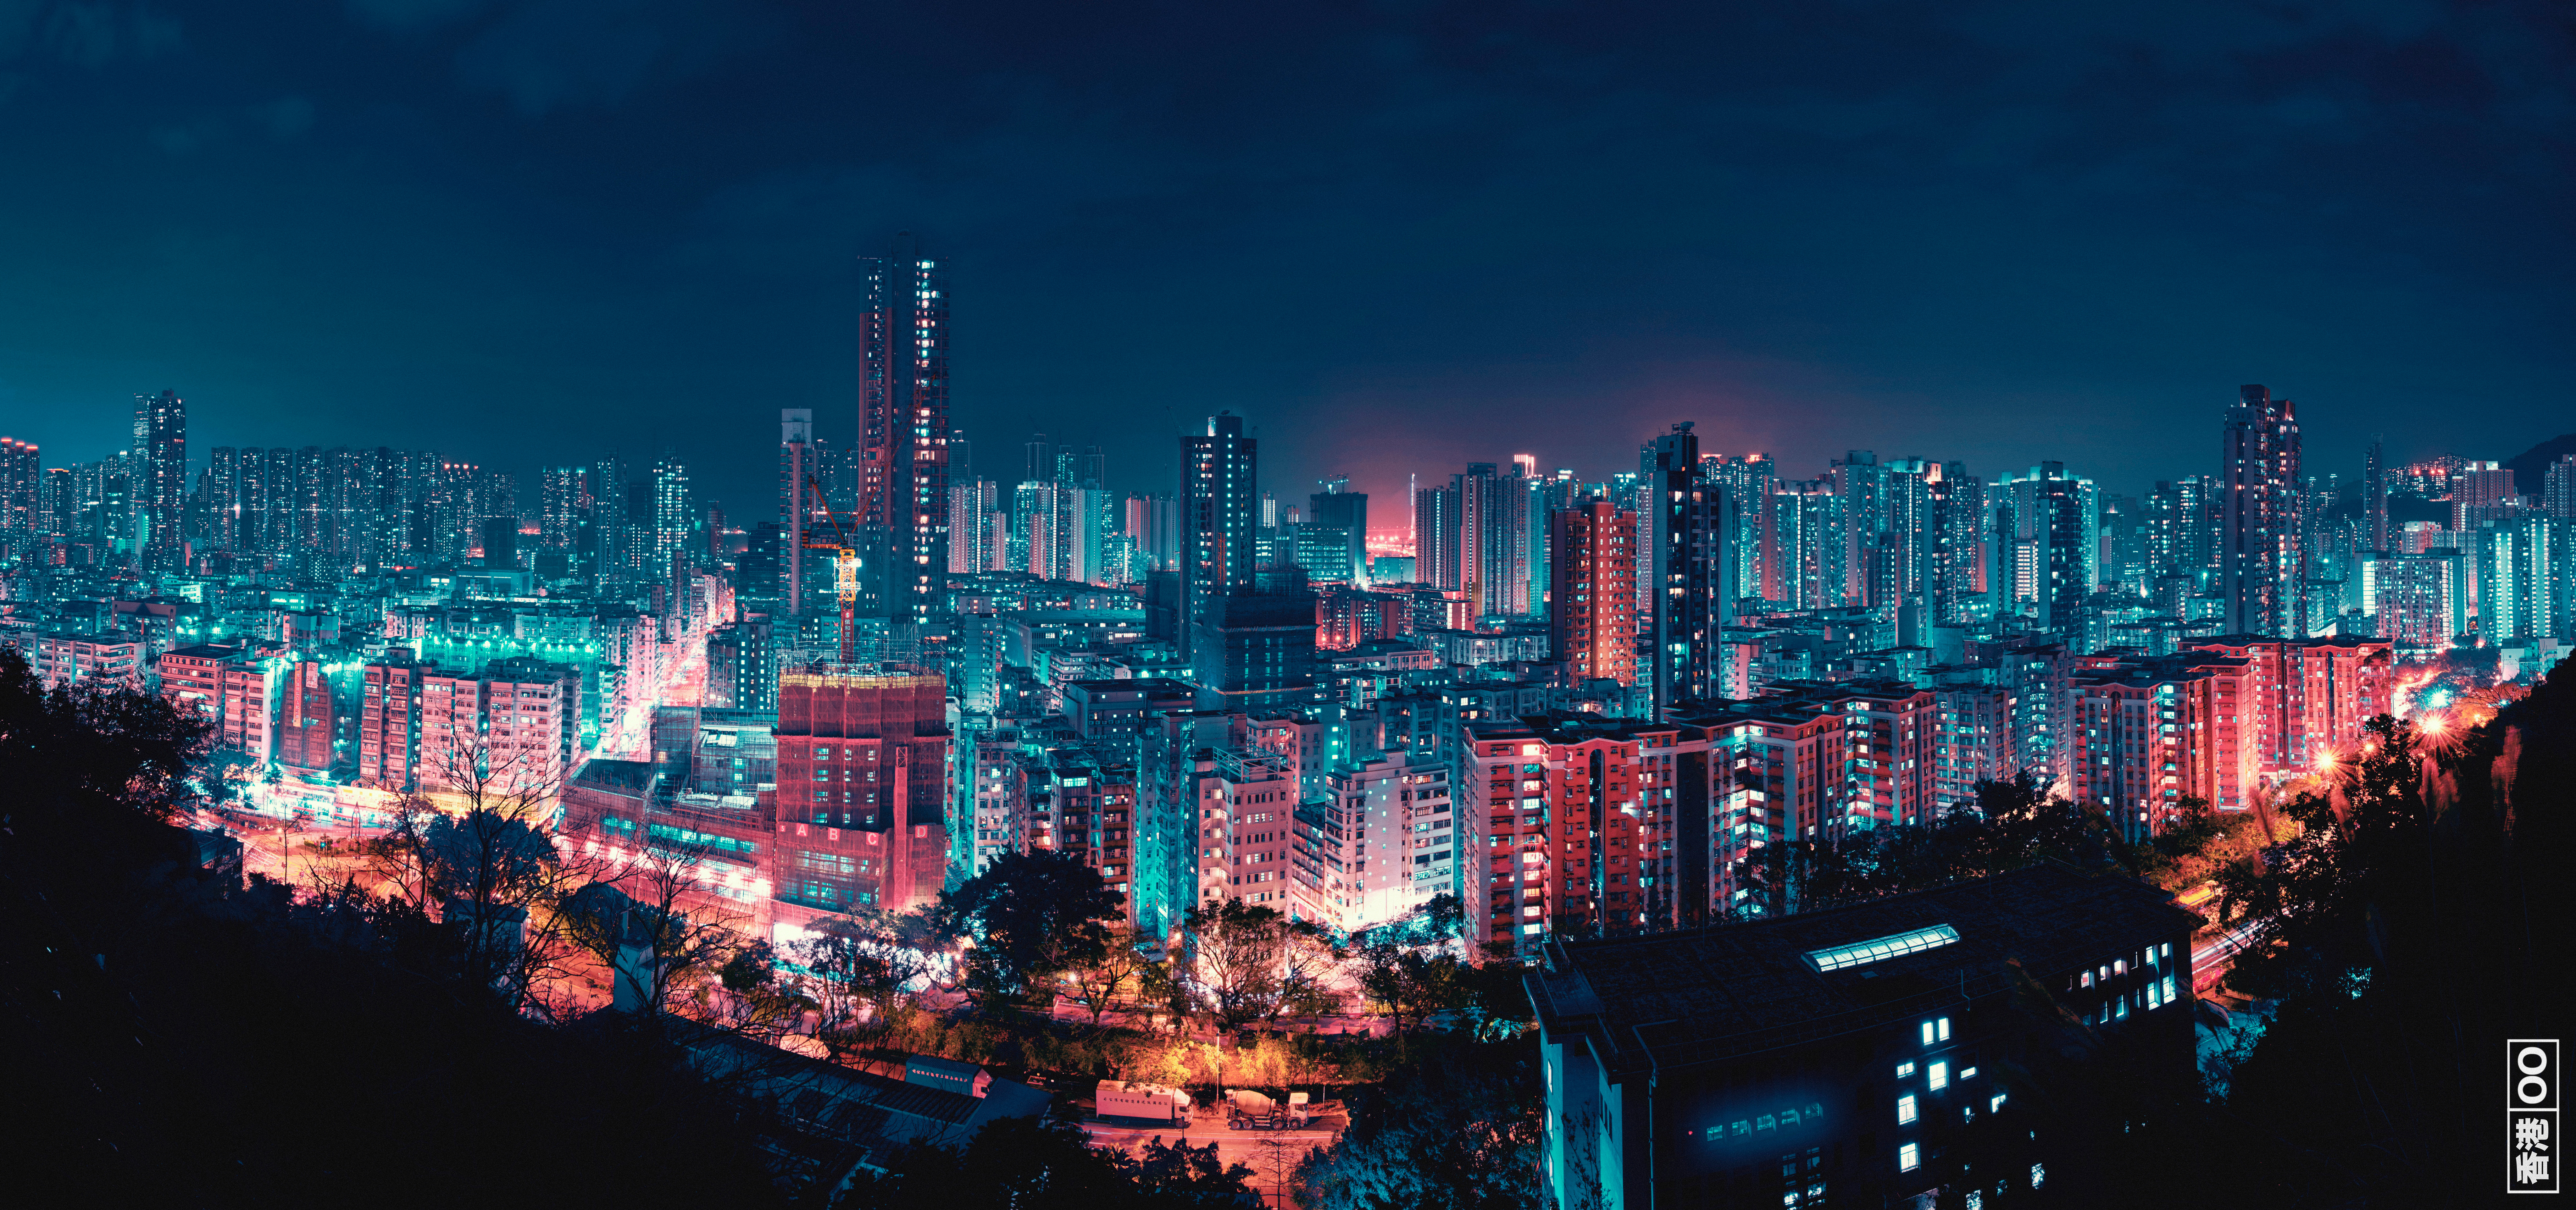 General 8192x3849 wide screen city city lights cityscape nightscape neon night street Hong Kong photography skyscraper building architecture low light